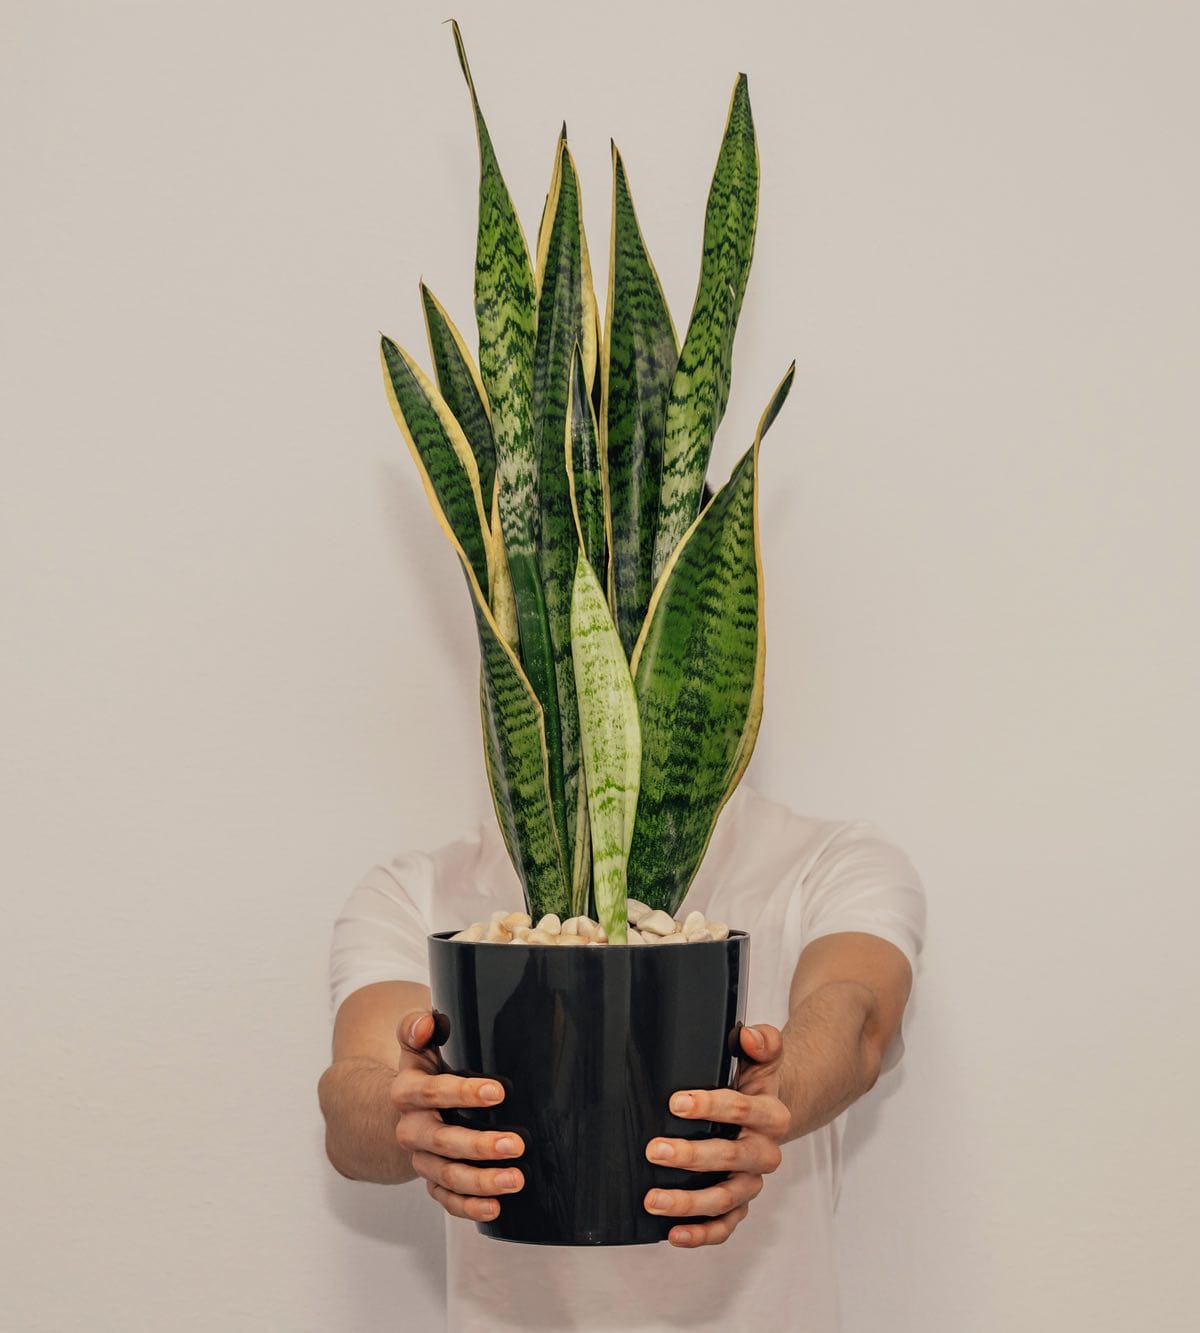 Adult sansevieria in the hands of a boy